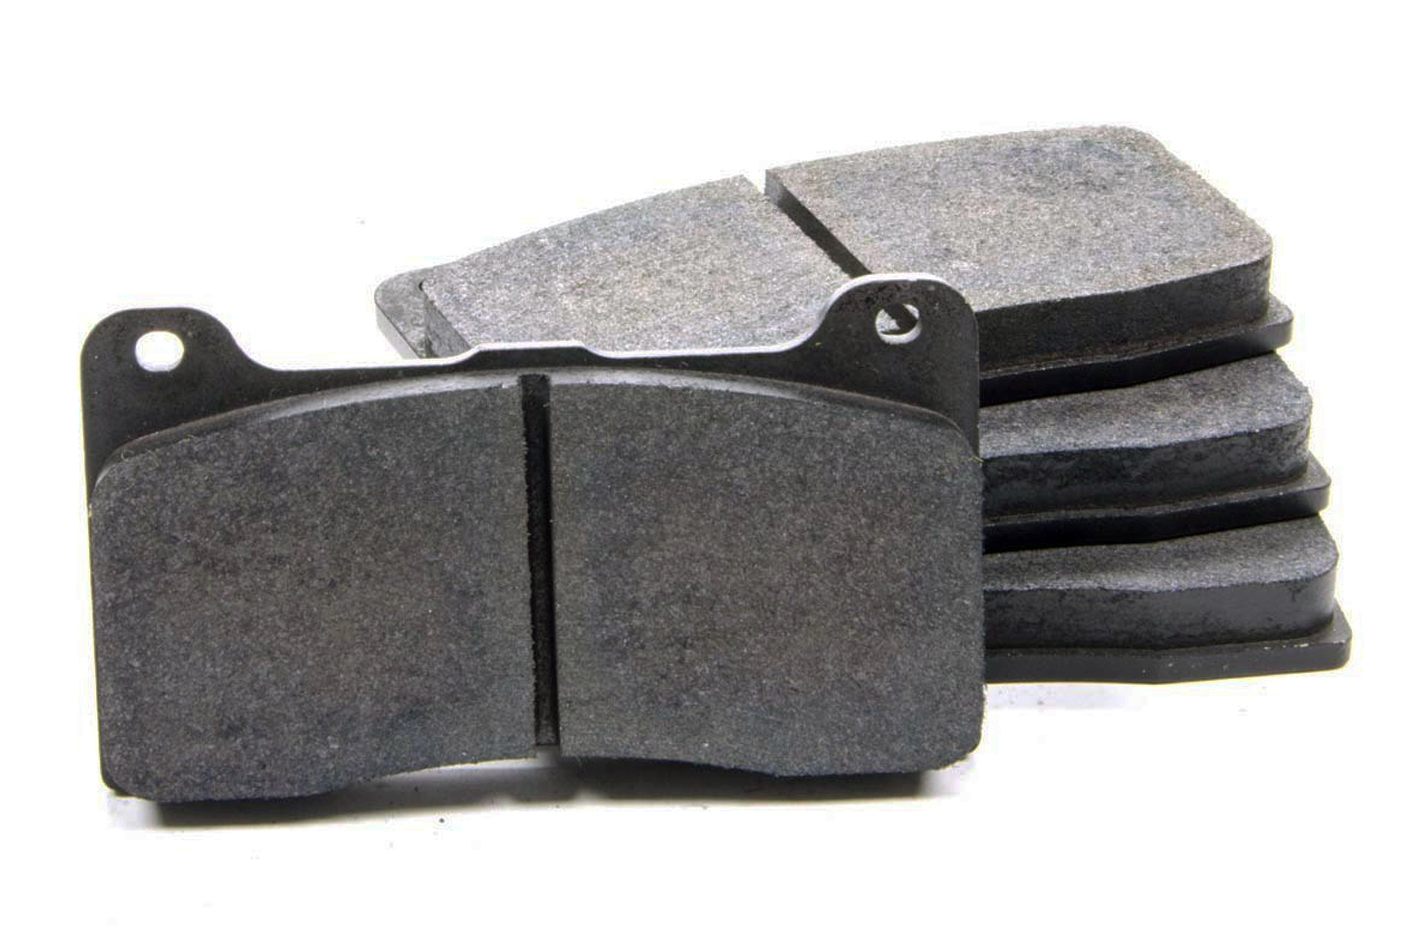 Wilwood 150-14775K Brake Pads, BP-30 Compound, Very High Friction, High Temperature, Narrow Dynalite / Dynapro Caliper, Kit